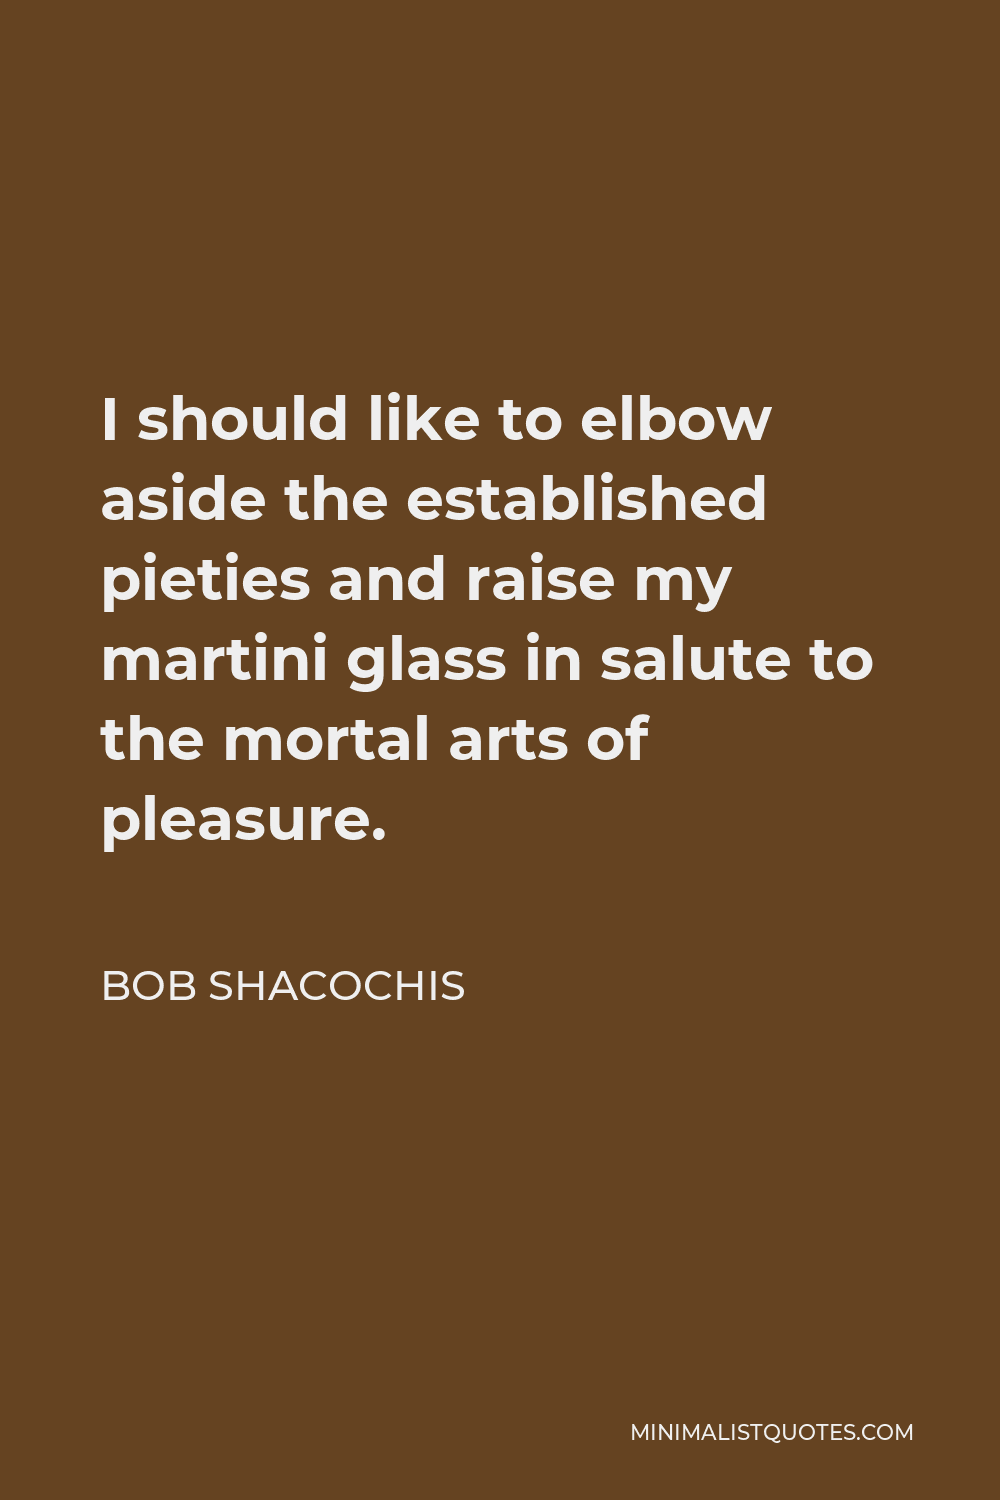 Bob Shacochis Quote - I should like to elbow aside the established pieties and raise my martini glass in salute to the mortal arts of pleasure.